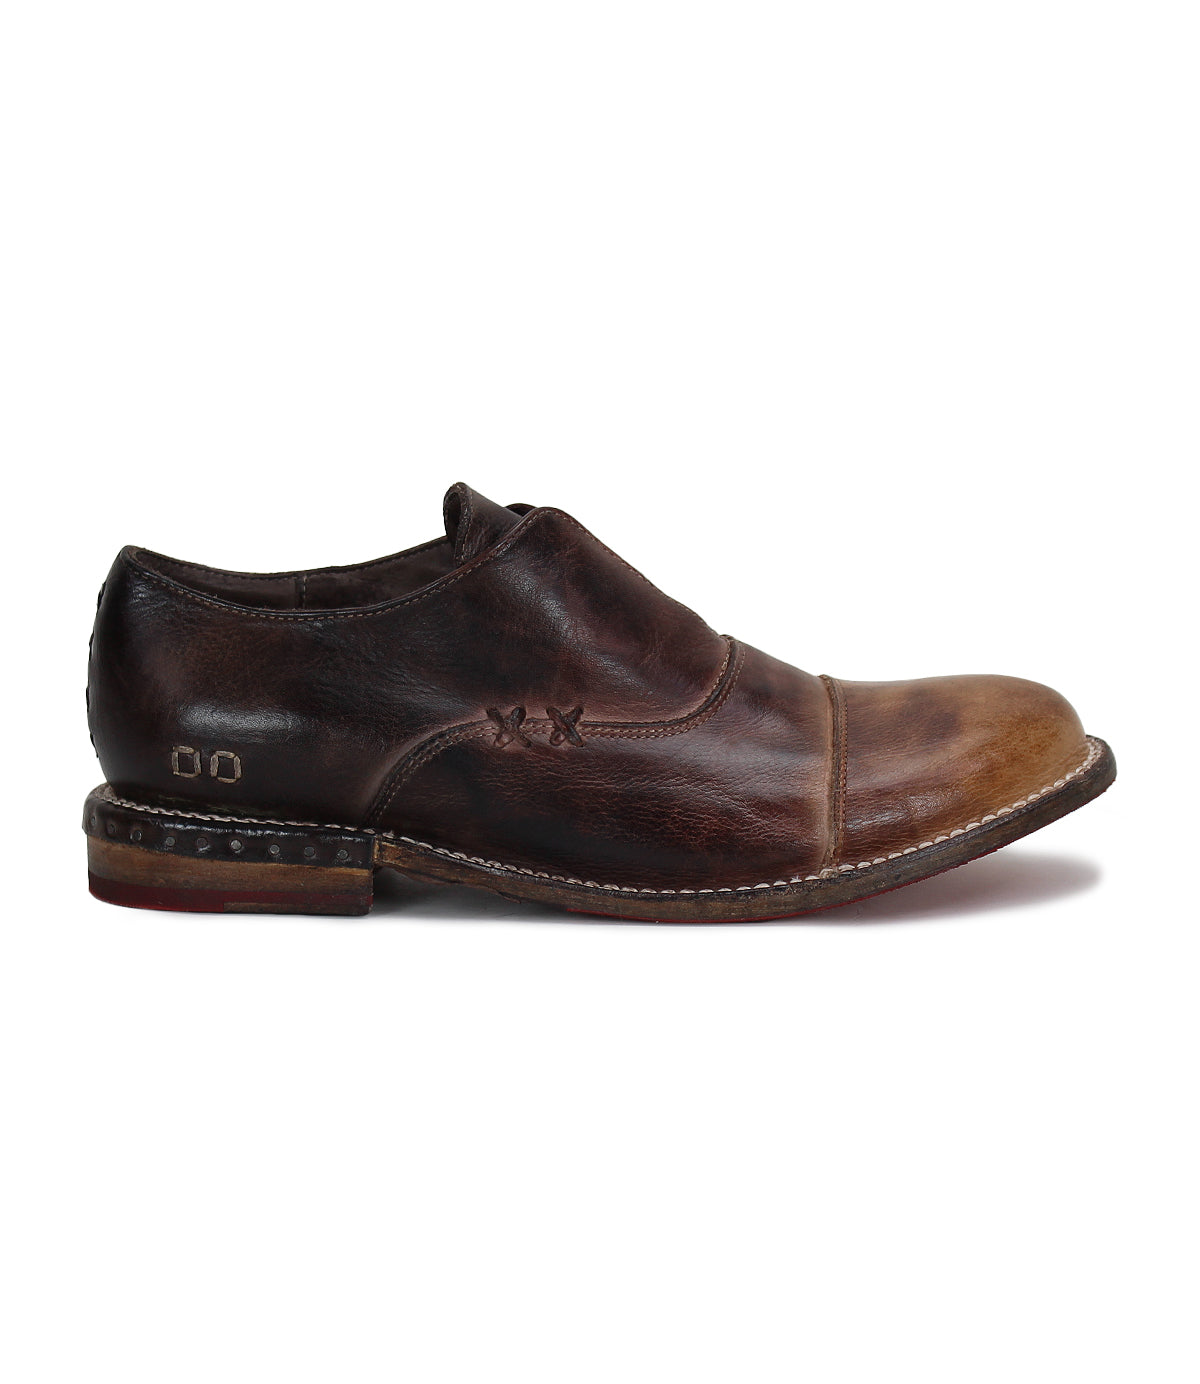 A men's Rose leather shoe with a Bed Stu brown sole.